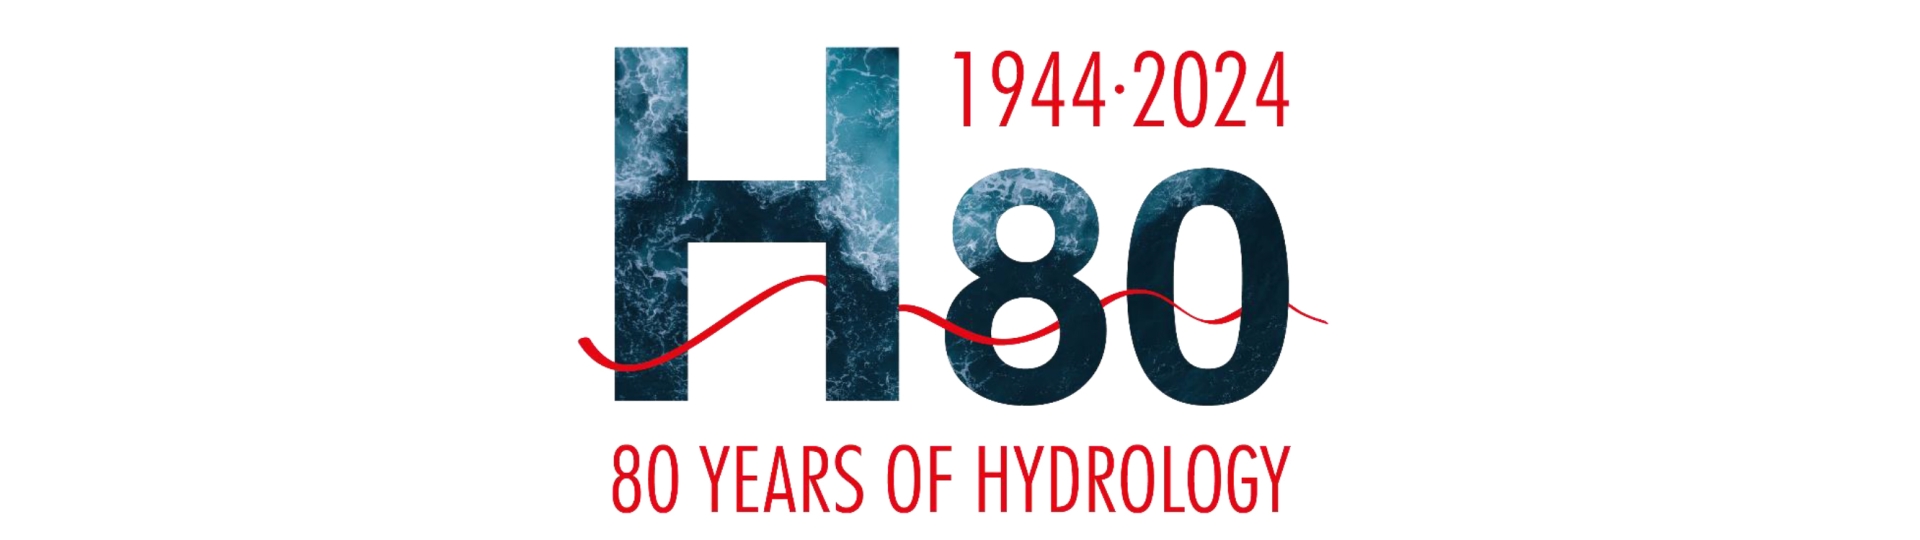 80 years of hydrology